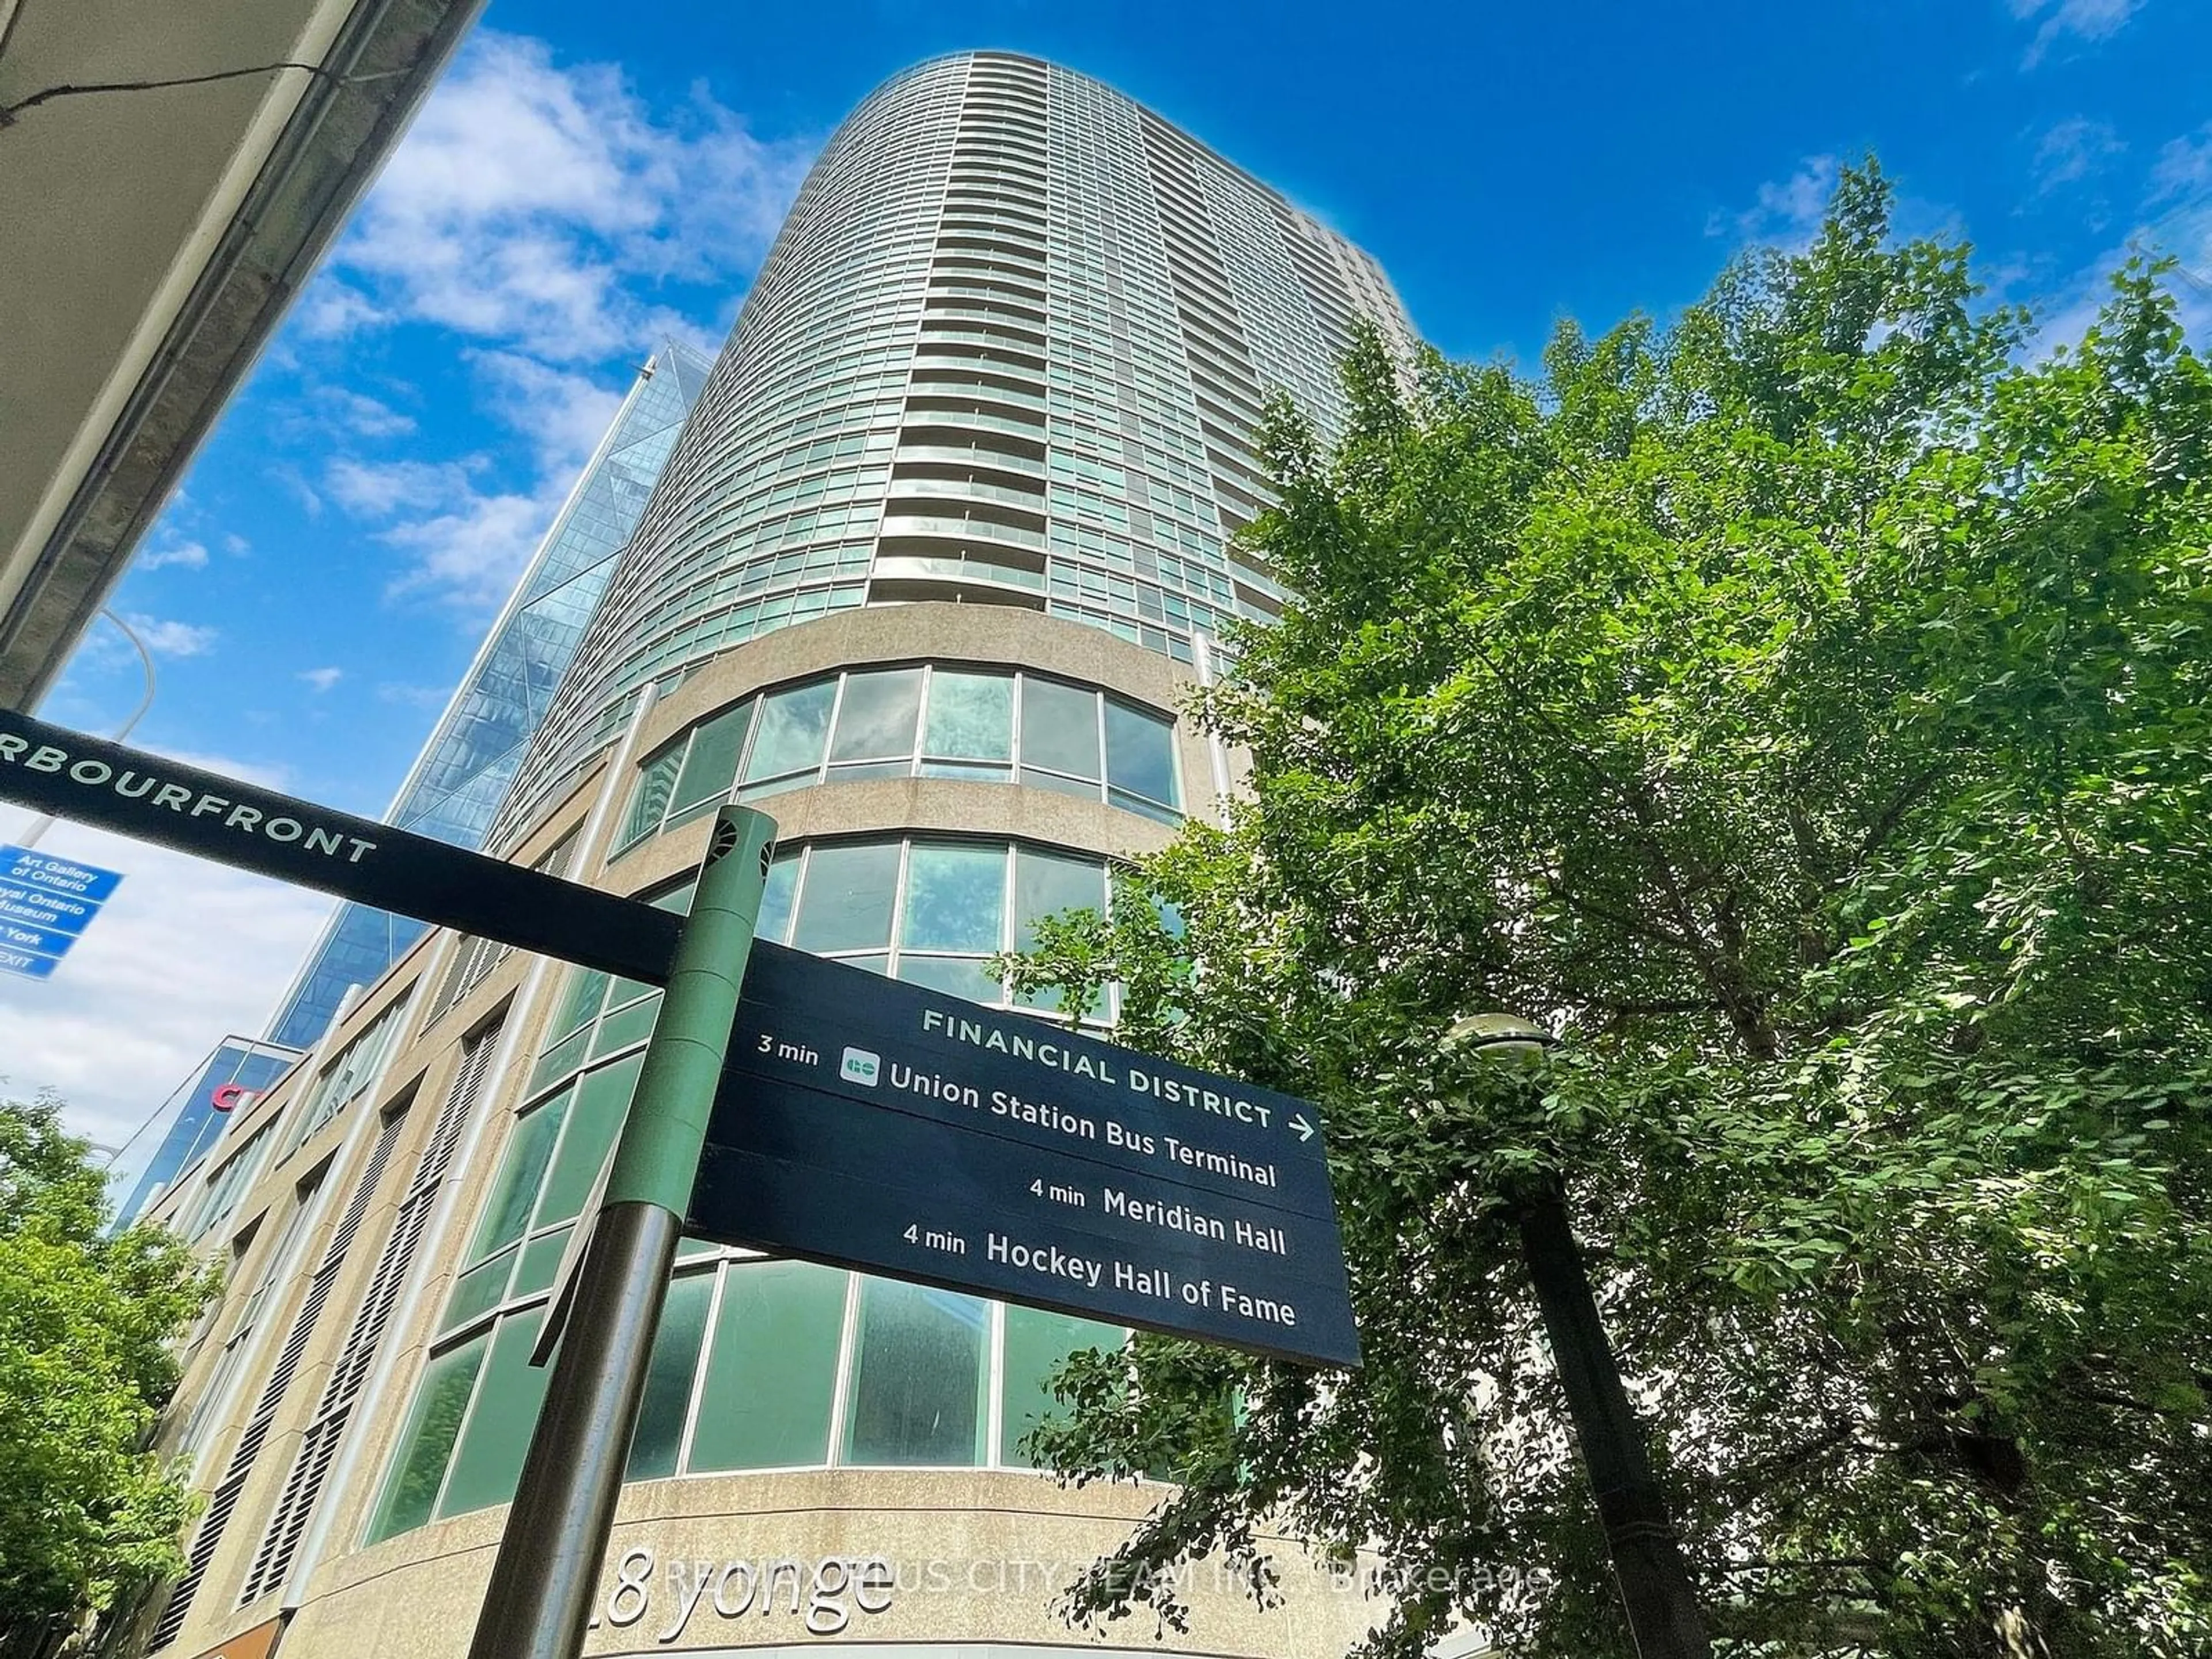 A pic from exterior of the house or condo for 18 Yonge St #1201, Toronto Ontario M5E 1Z8